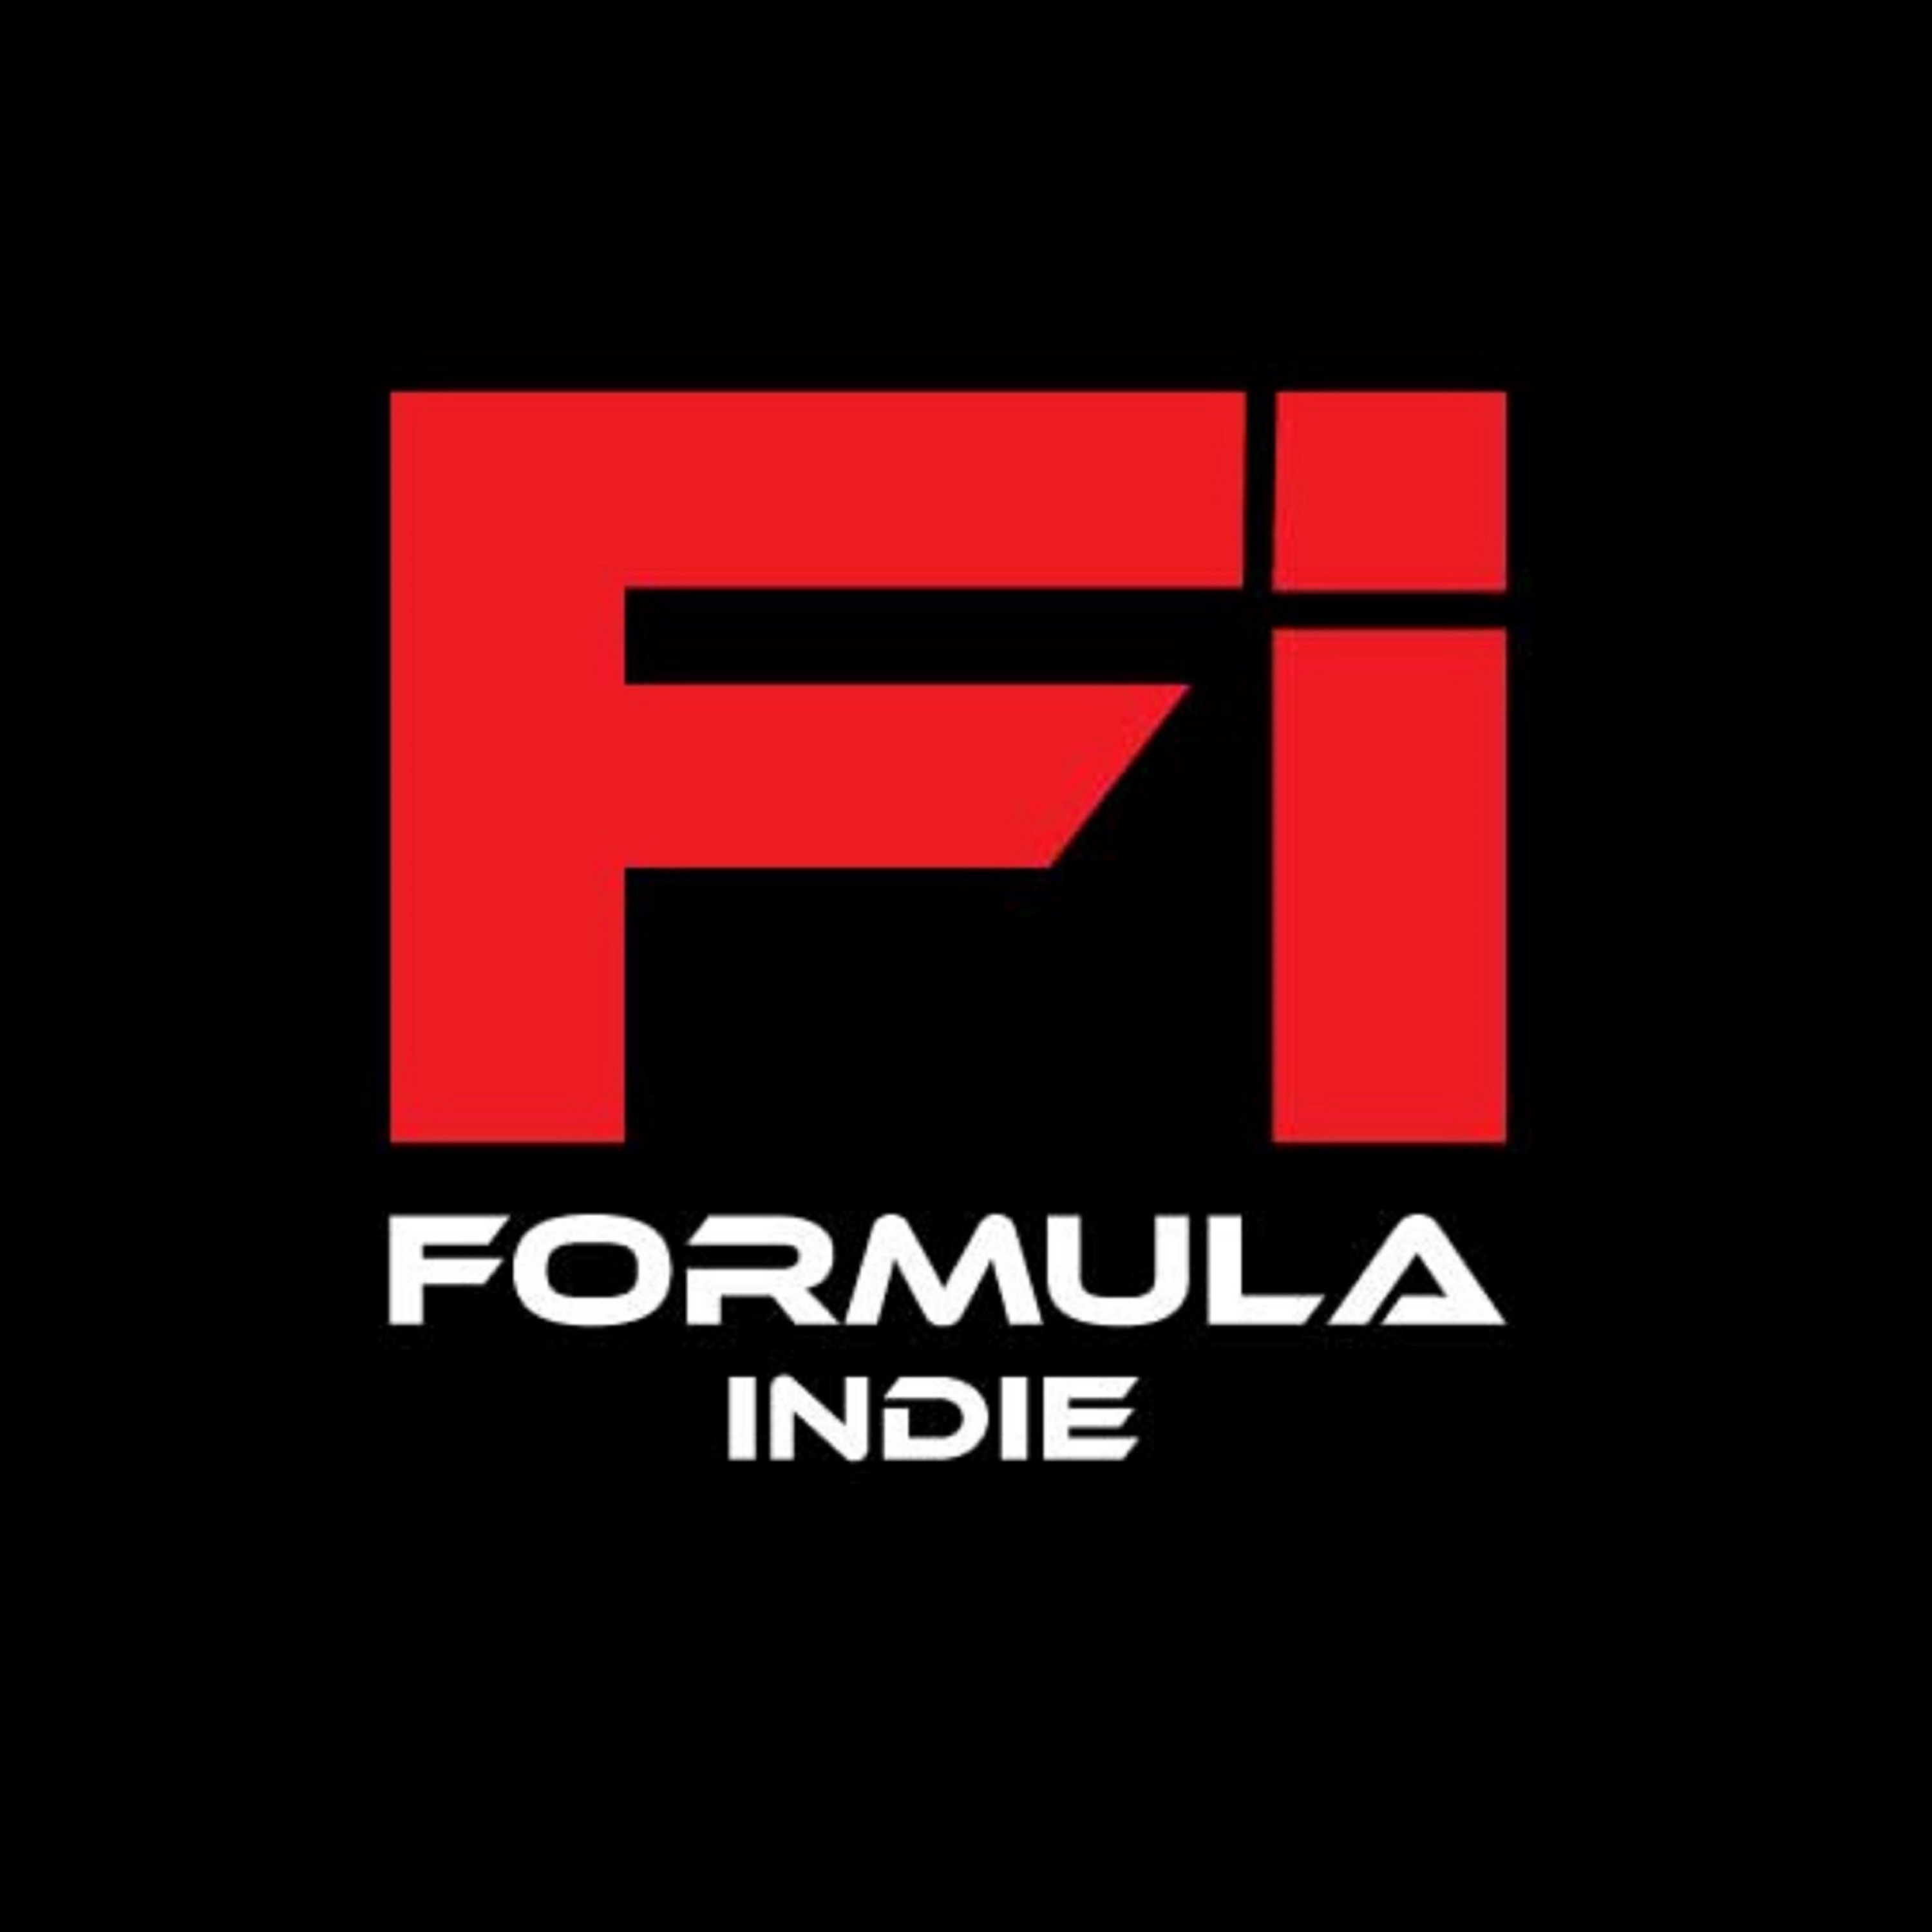 Art for FORMULA INDIE PROMO by EUROPEAN INDIE MUSIC NETWORK